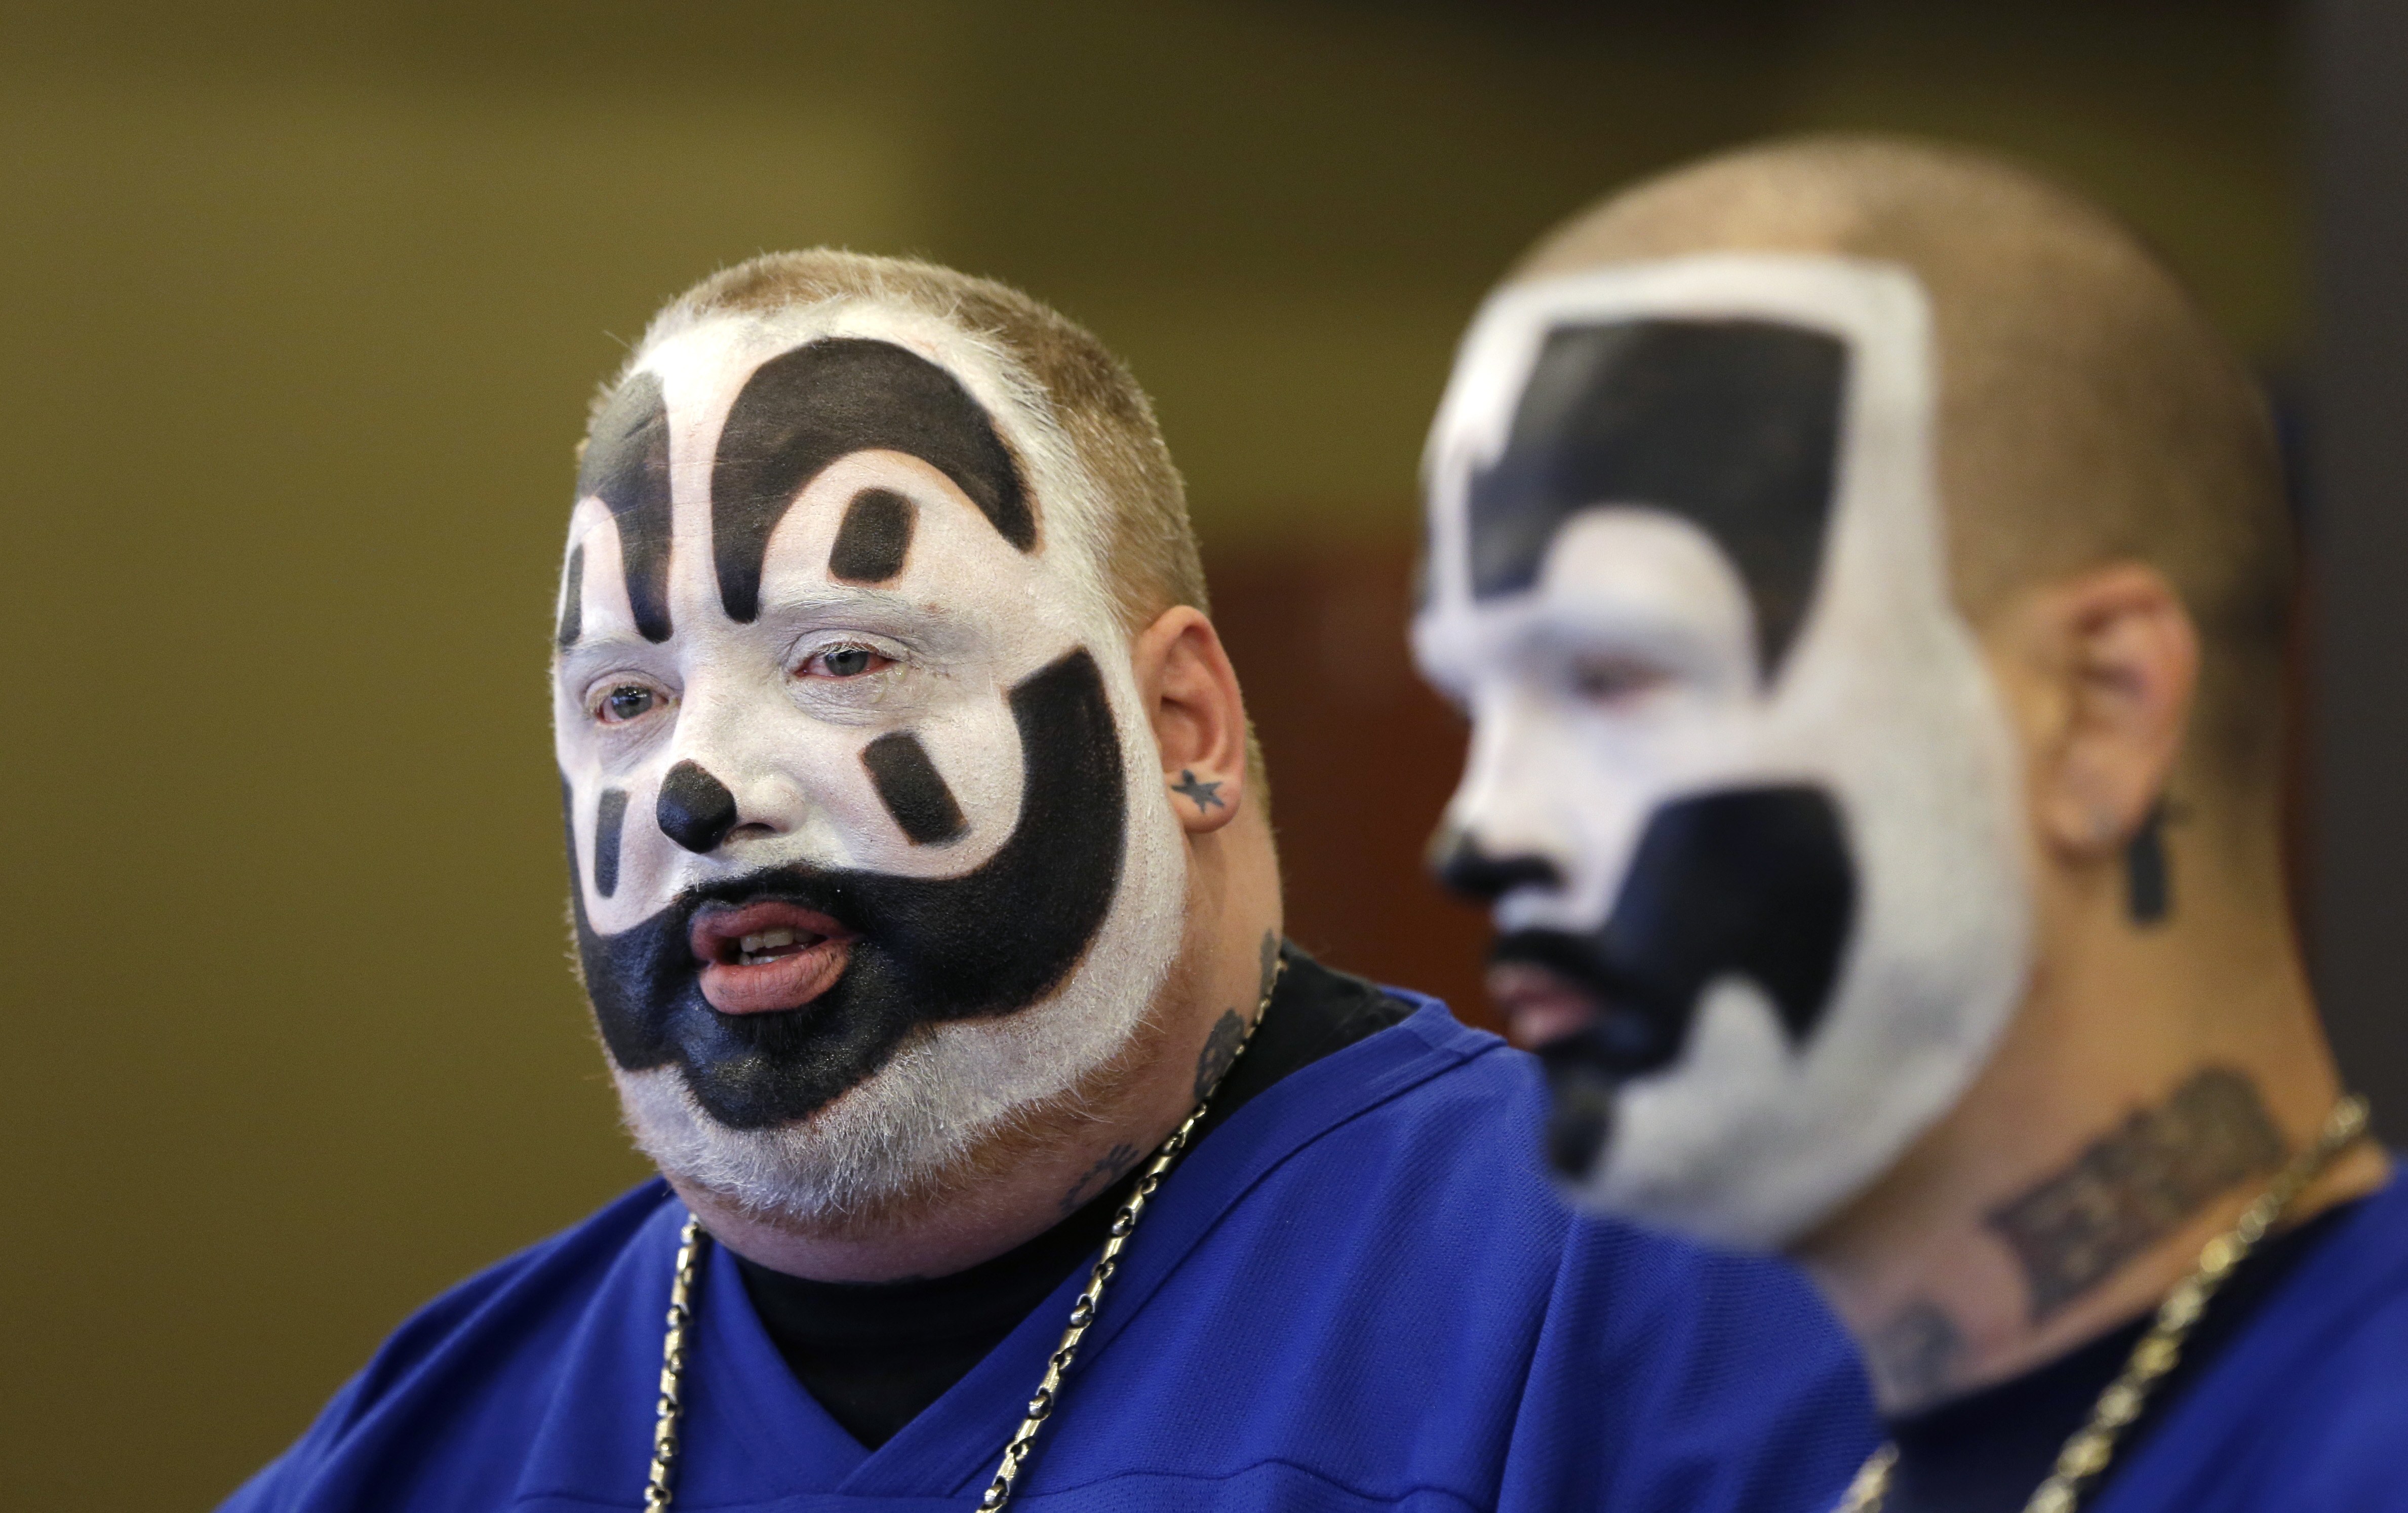 Landmand elasticitet Siege What's a Juggalo? "Much-maligned" group to rally in DC - CBS News